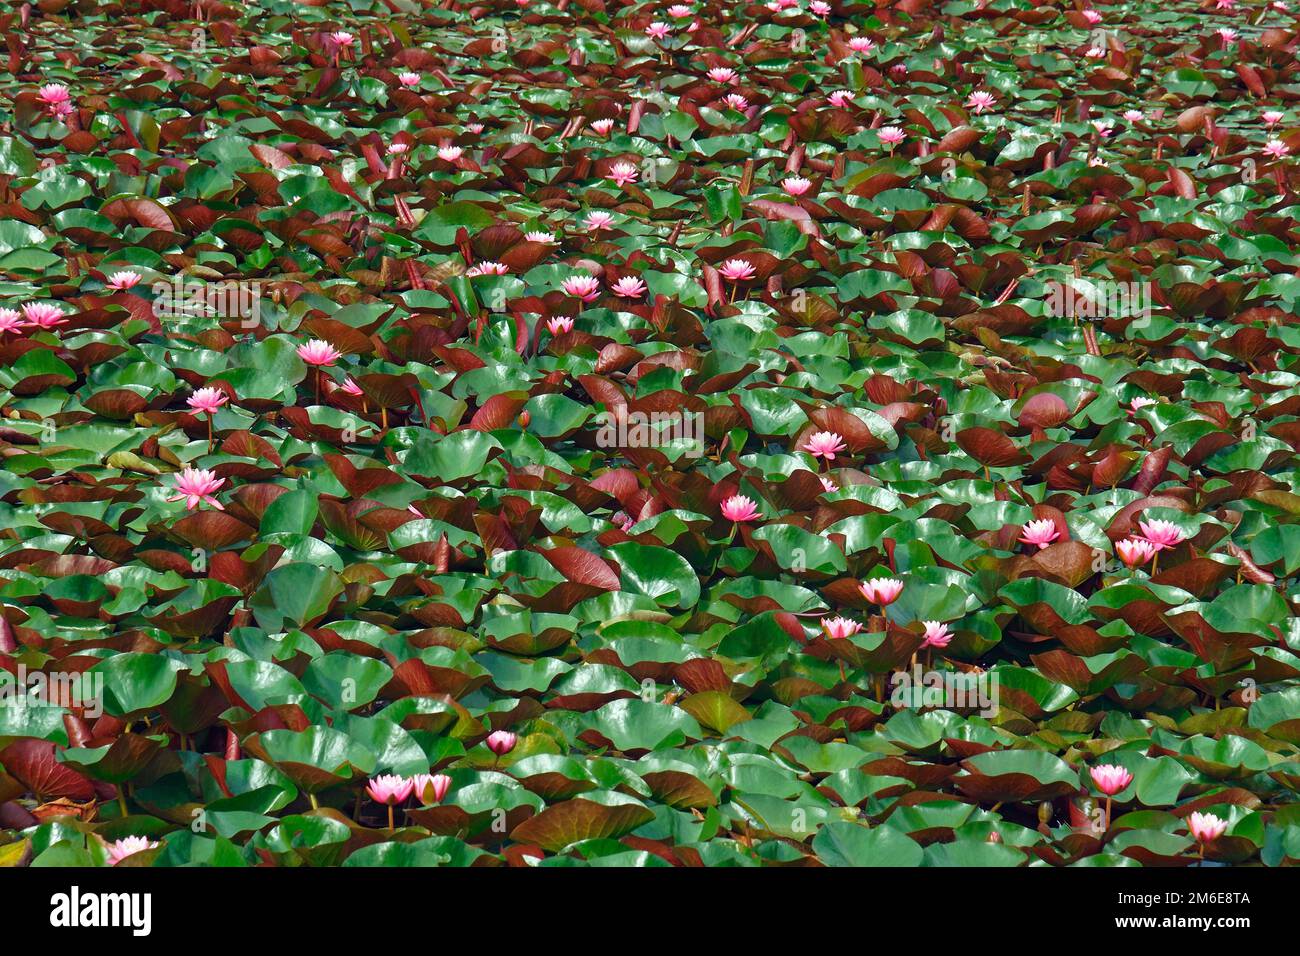 Imagee of multiple Americal white waterlily flowers and leaves Stock Photo